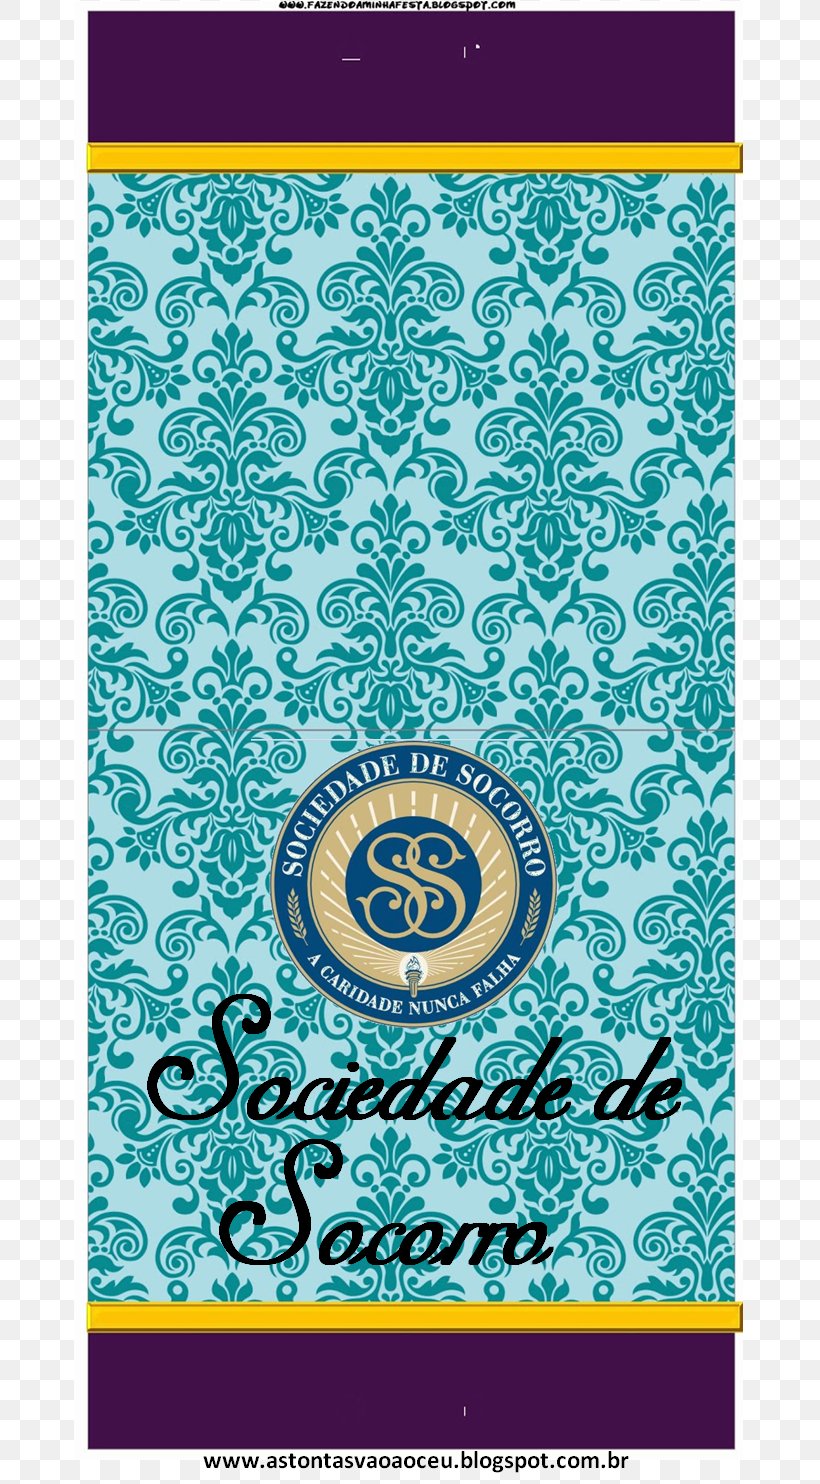 Book Of Mormon Relief Society The Church Of Jesus Christ Of Latter-day Saints Mormonism Campinas Brazil Temple, PNG, 779x1484px, Book Of Mormon, Aqua, Blue, Coaching, Convite Download Free